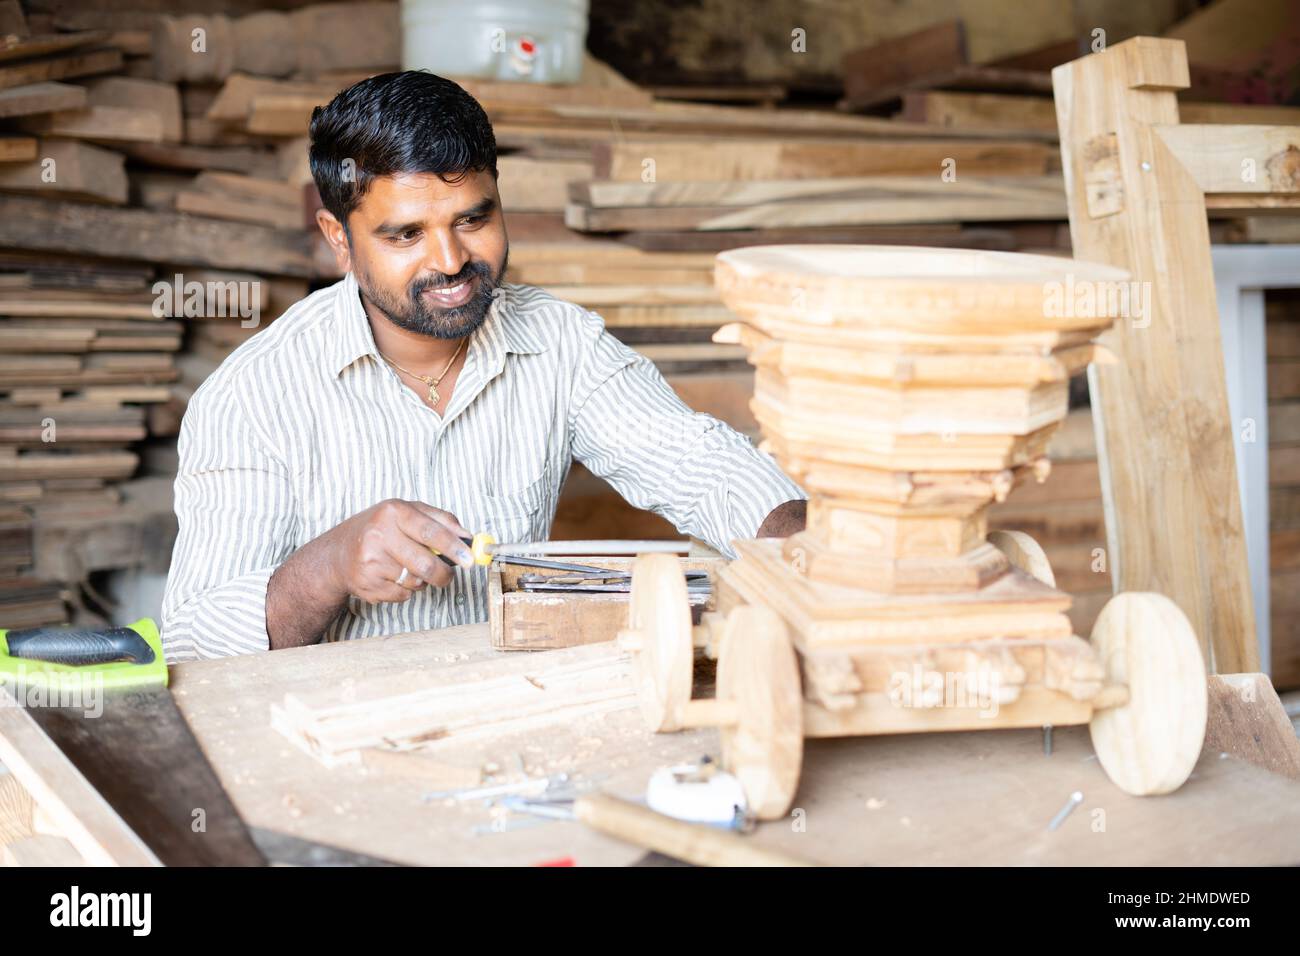 Focus on carpenter, young indian carpenter polising or shaping chariot by using carpentry tools at workplace - concept of craftperson, self employed Stock Photo